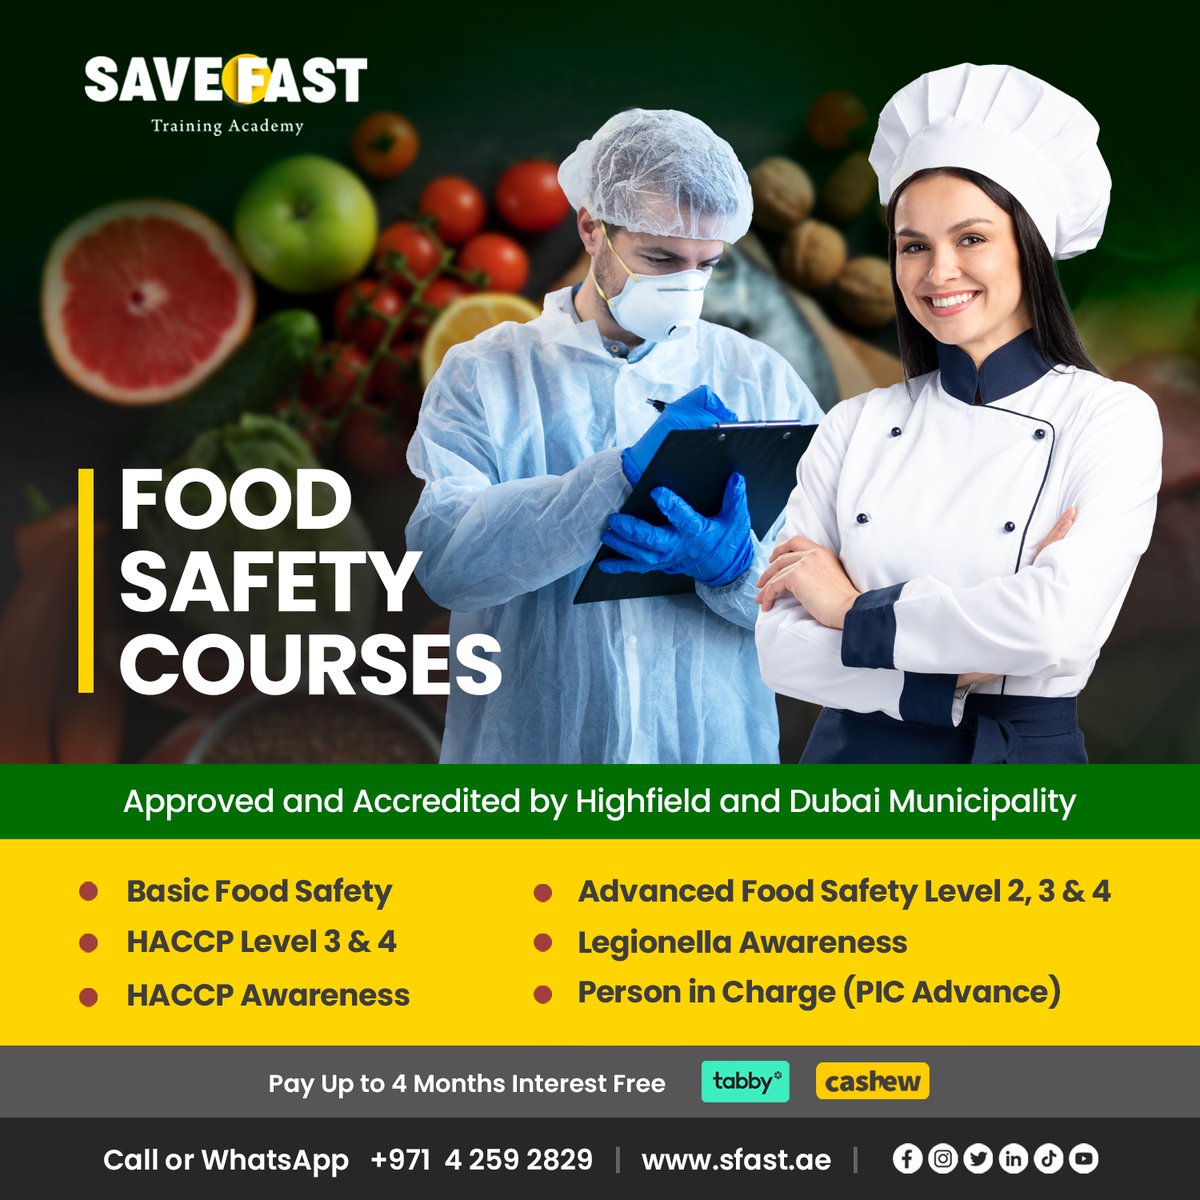 Invest in Your Professional Growth
Join Our Comprehensive Food Safety Courses Today!

Call or WhatsApp:
+9714 259 2829

sfast.ae

#foodsafety #foodsafetycourses #food #foodindustry #foodprofessional #foodsafetyfirsy #haccp #dubaimuncipality #hotel #restaurant